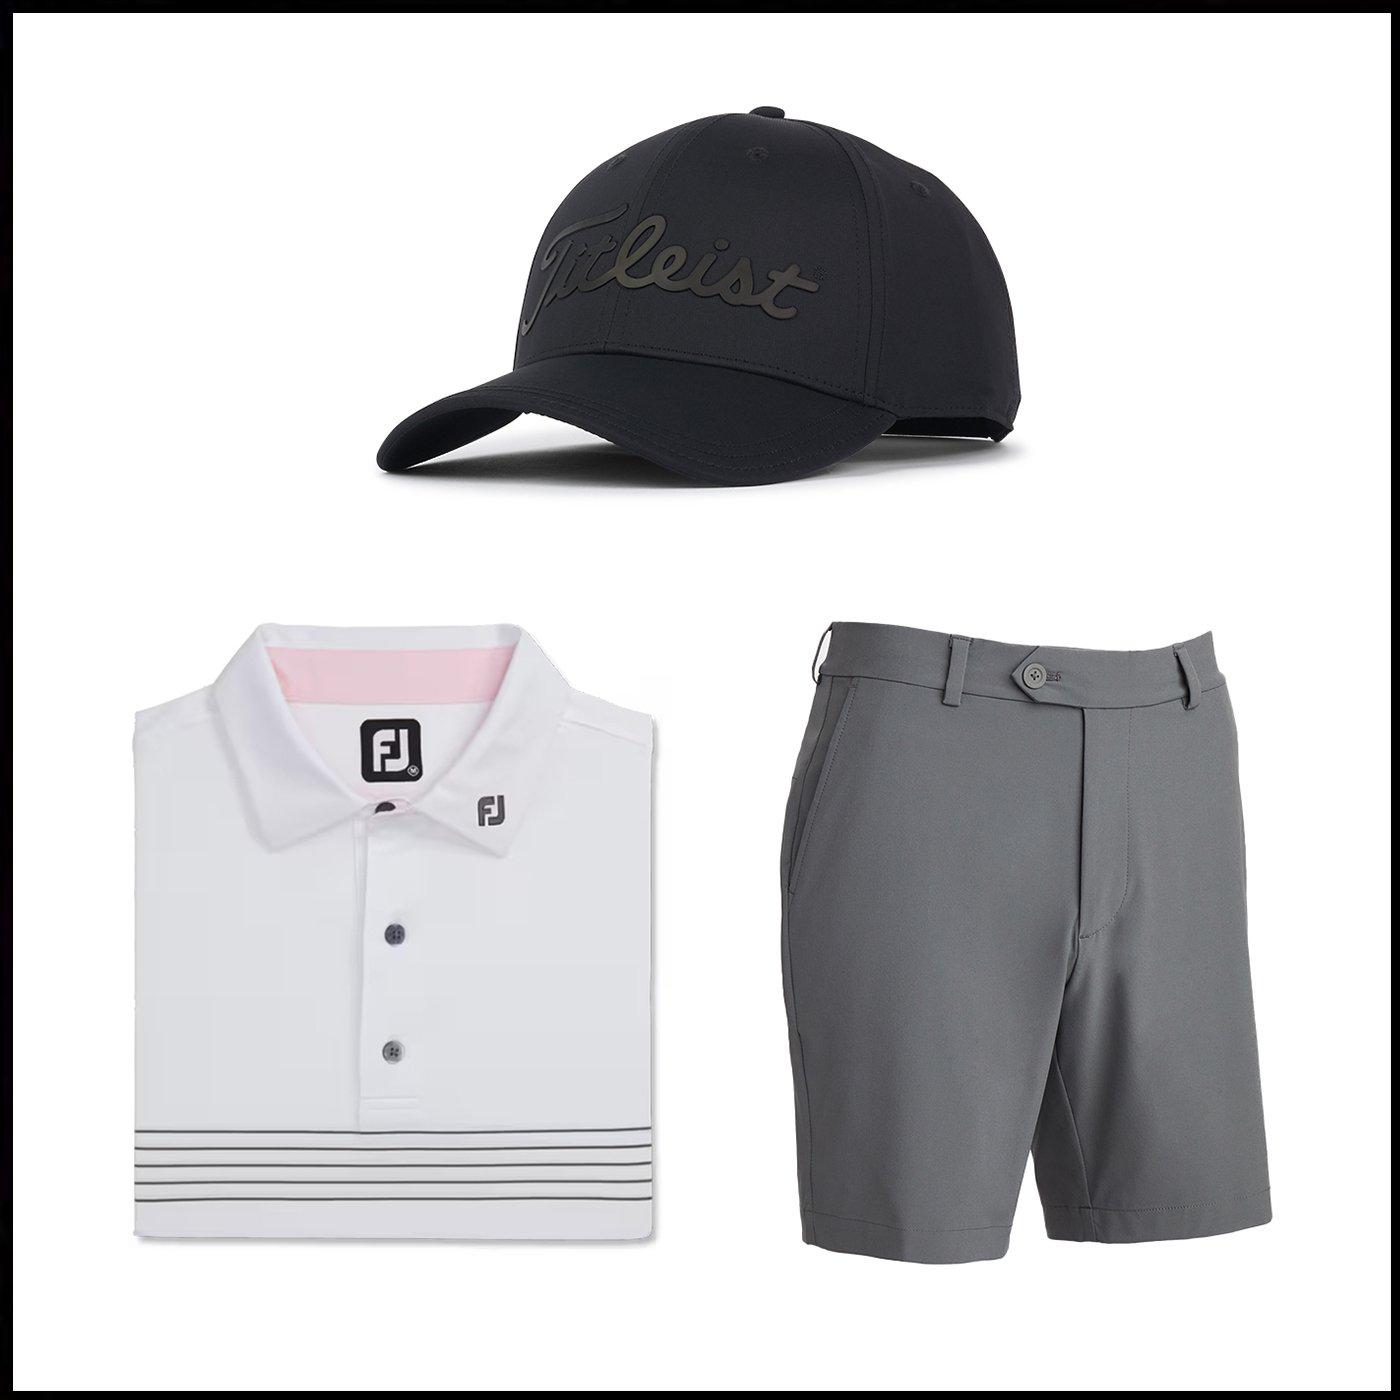 Men's Performance Outfit